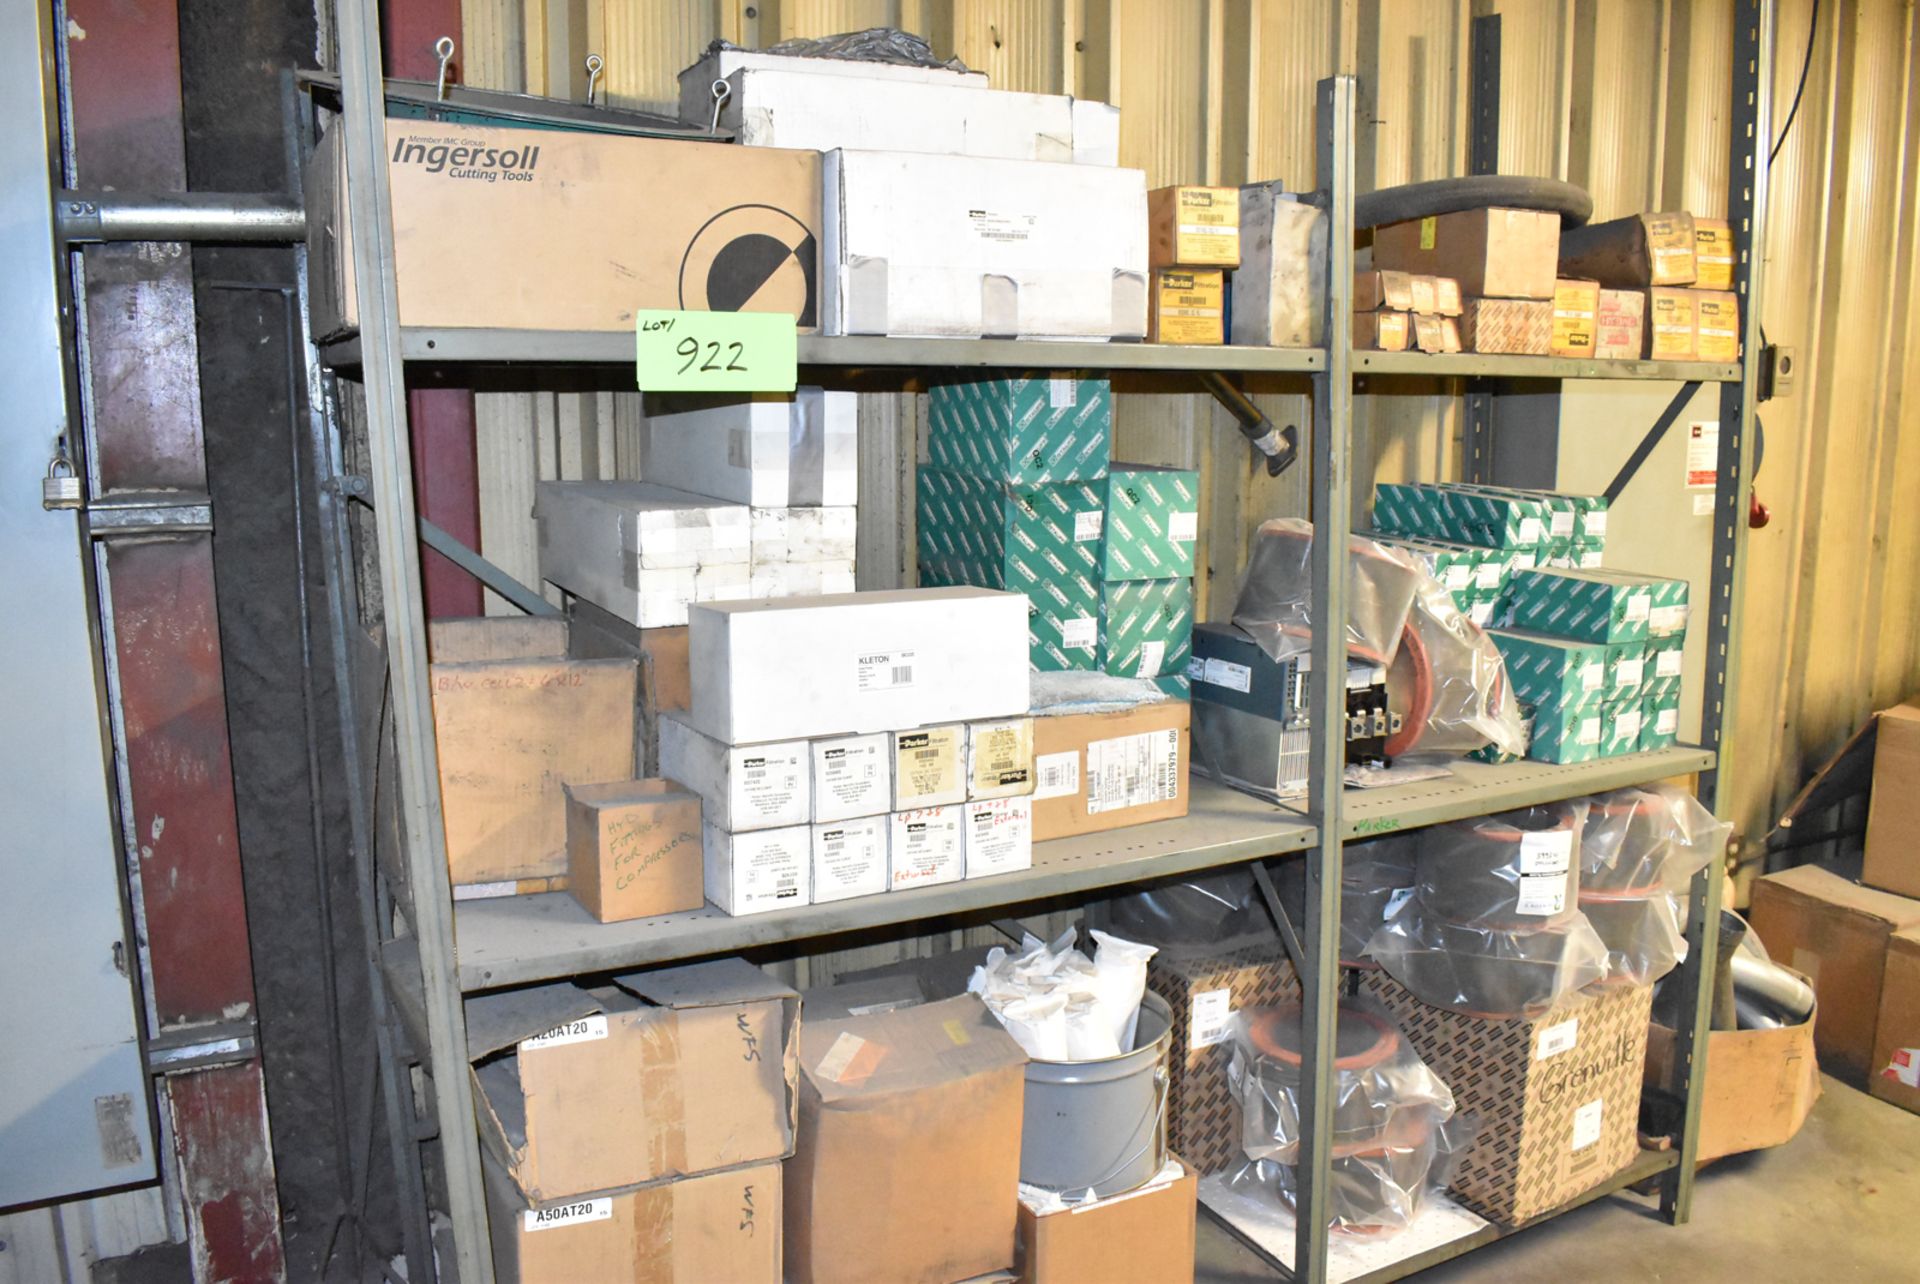 LOT/ SHELVES WITH CONTENTS - AIR FILTERS, HYDRAULIC FILTERS, SPARE PUMPS & VALVES